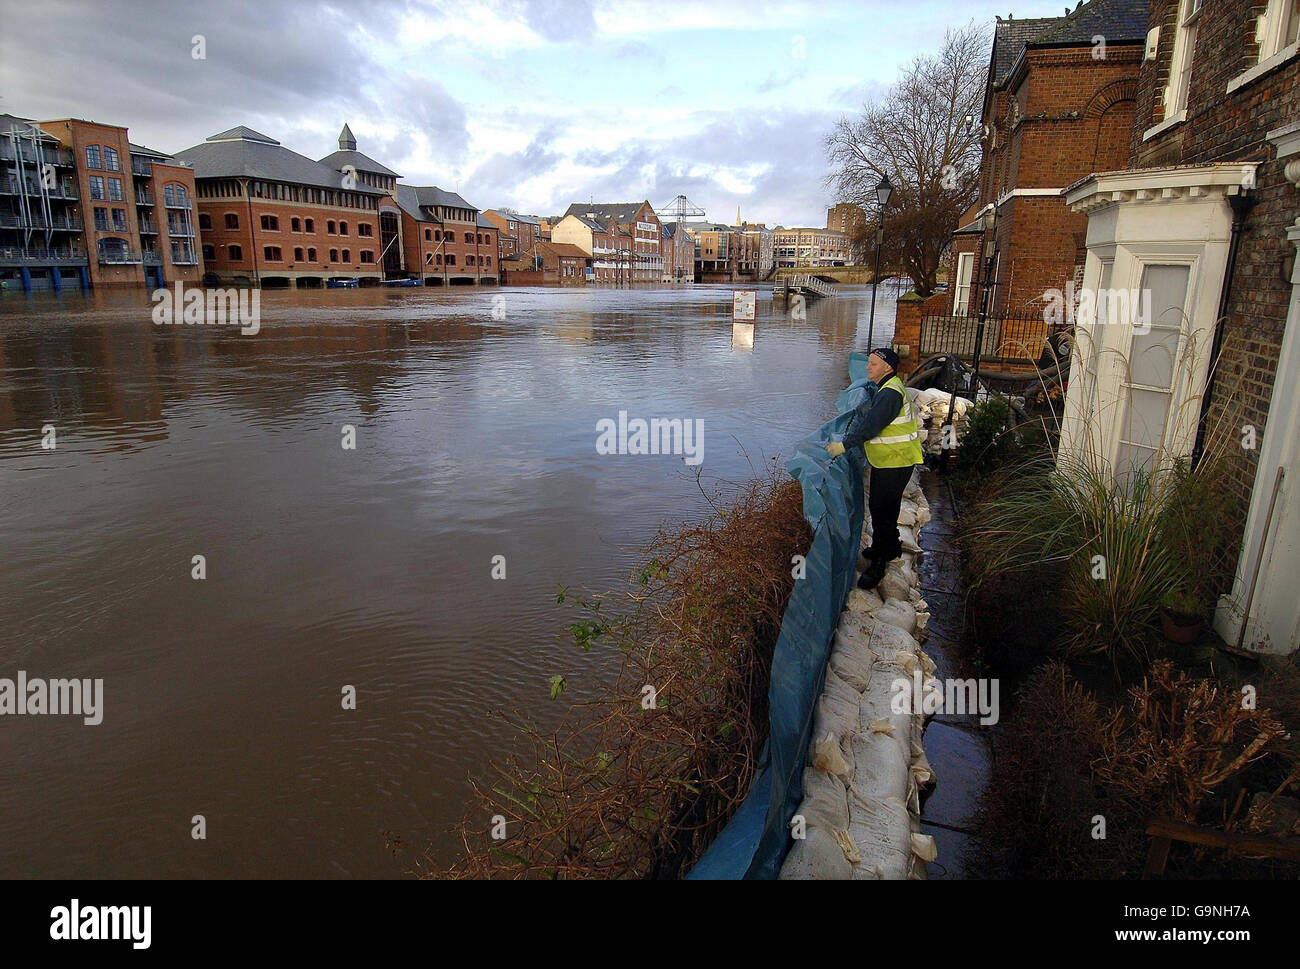 A York Council worker keeps an eye on the flooding, after workers have manned pumps around the clock to try and keep floodwater out of riverside properties, as the River Ouse in York continues to cause problems to the City today. Stock Photo